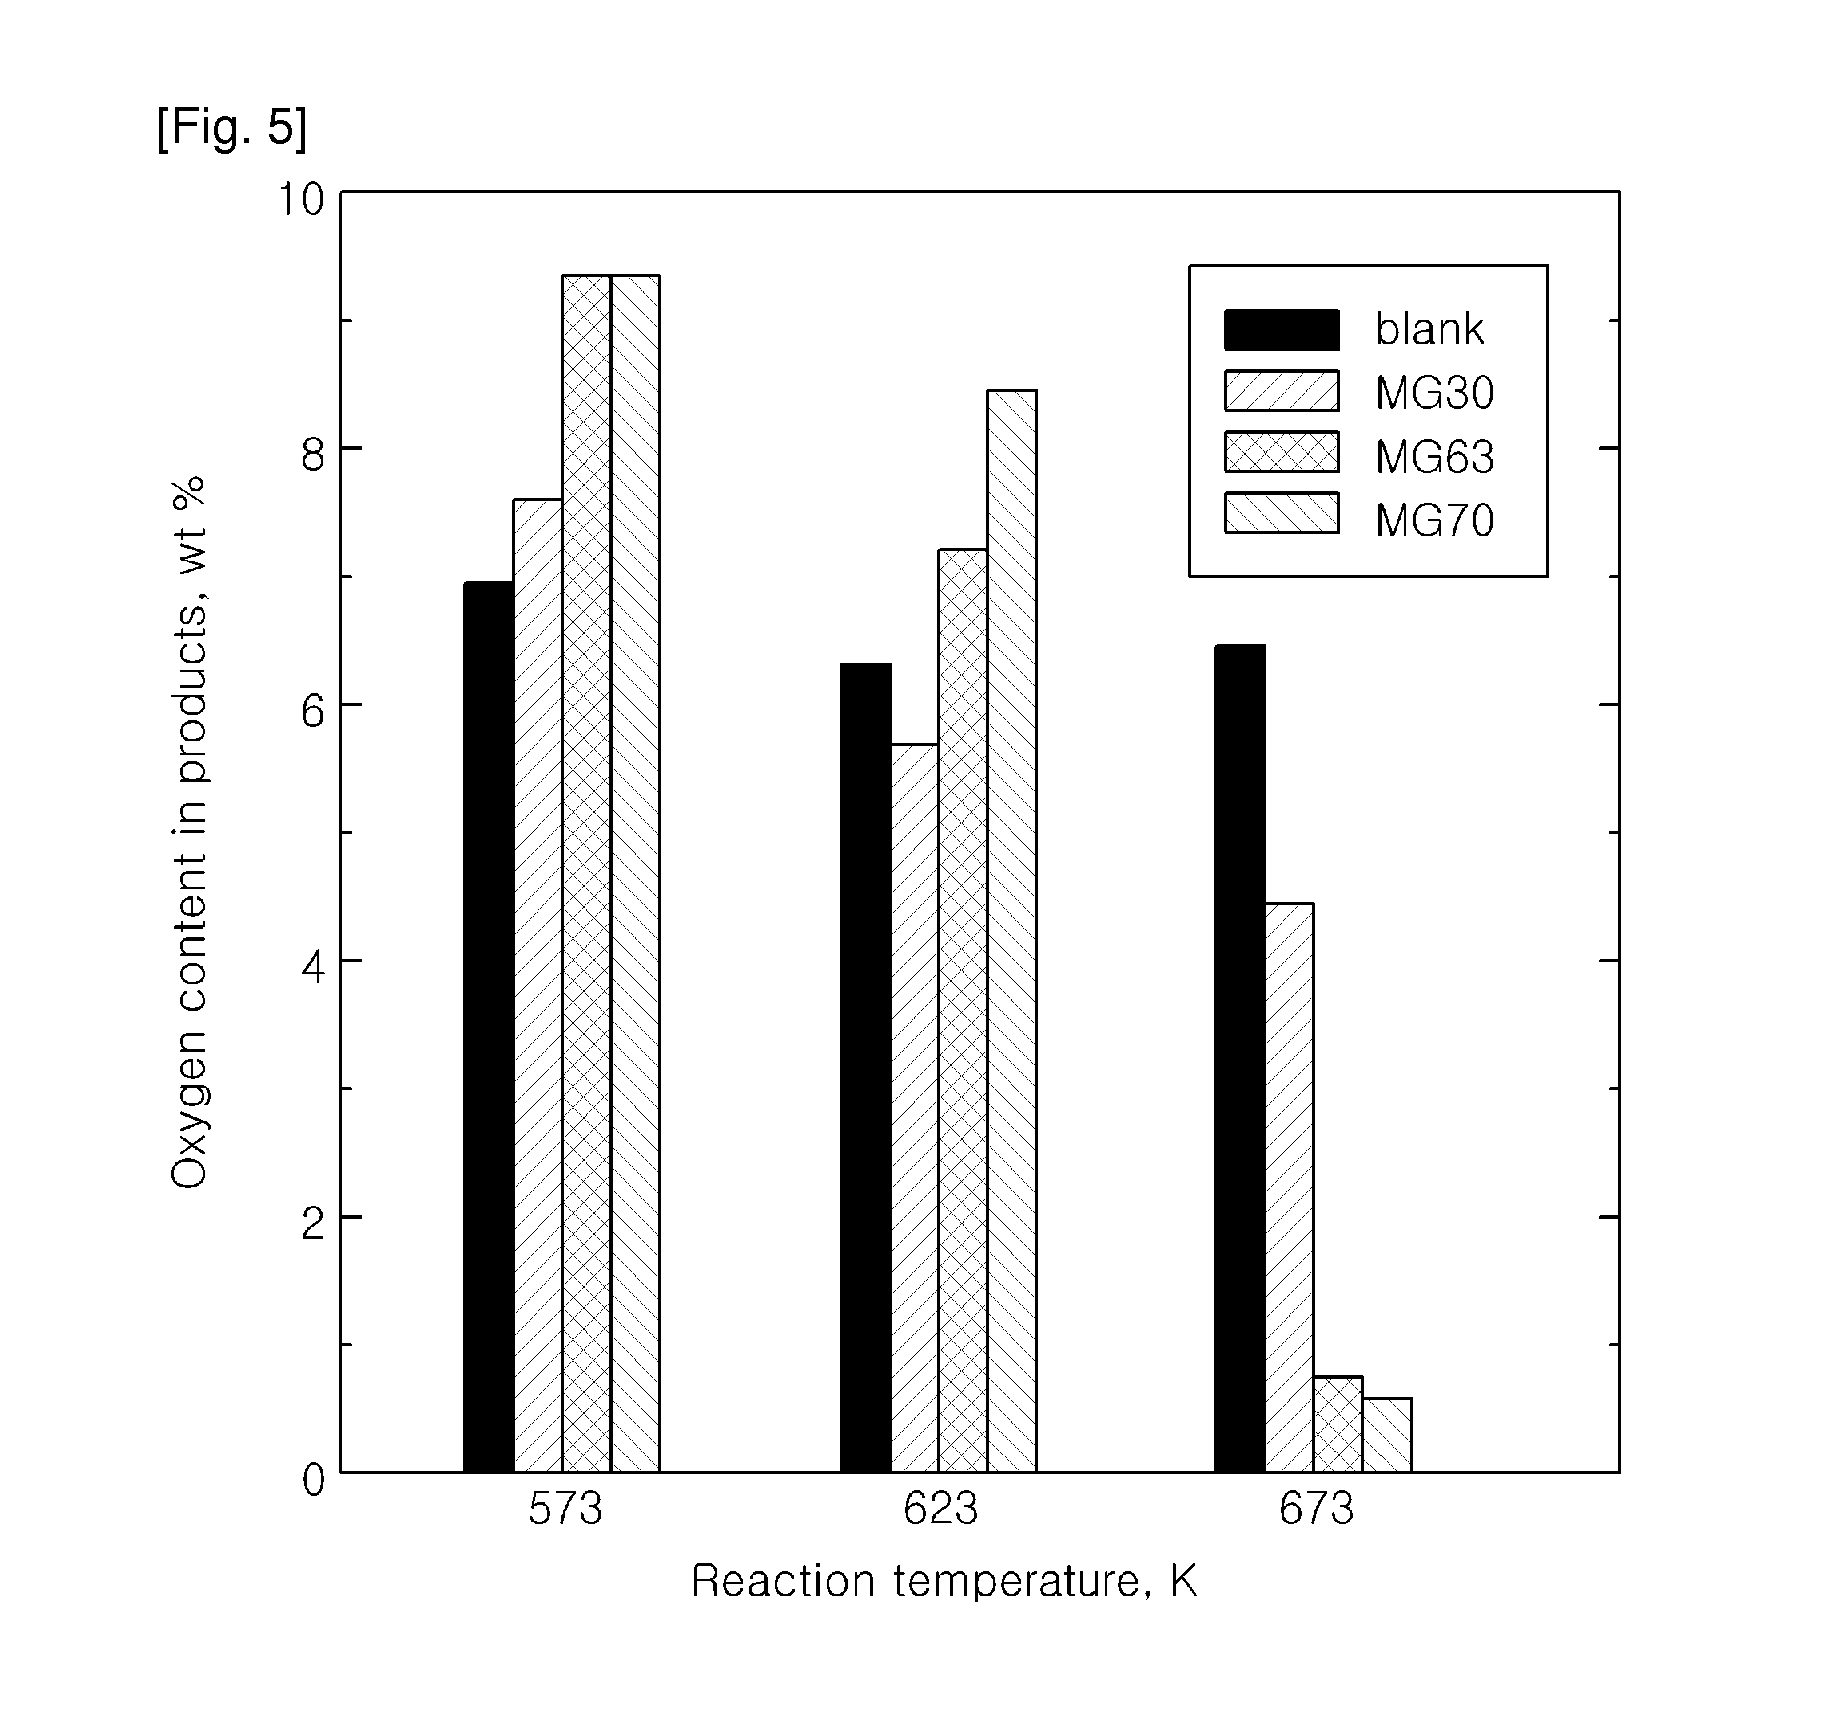 Method for making hydrocarbons by using a lipid derived from a biological organisim and hydrotalcite